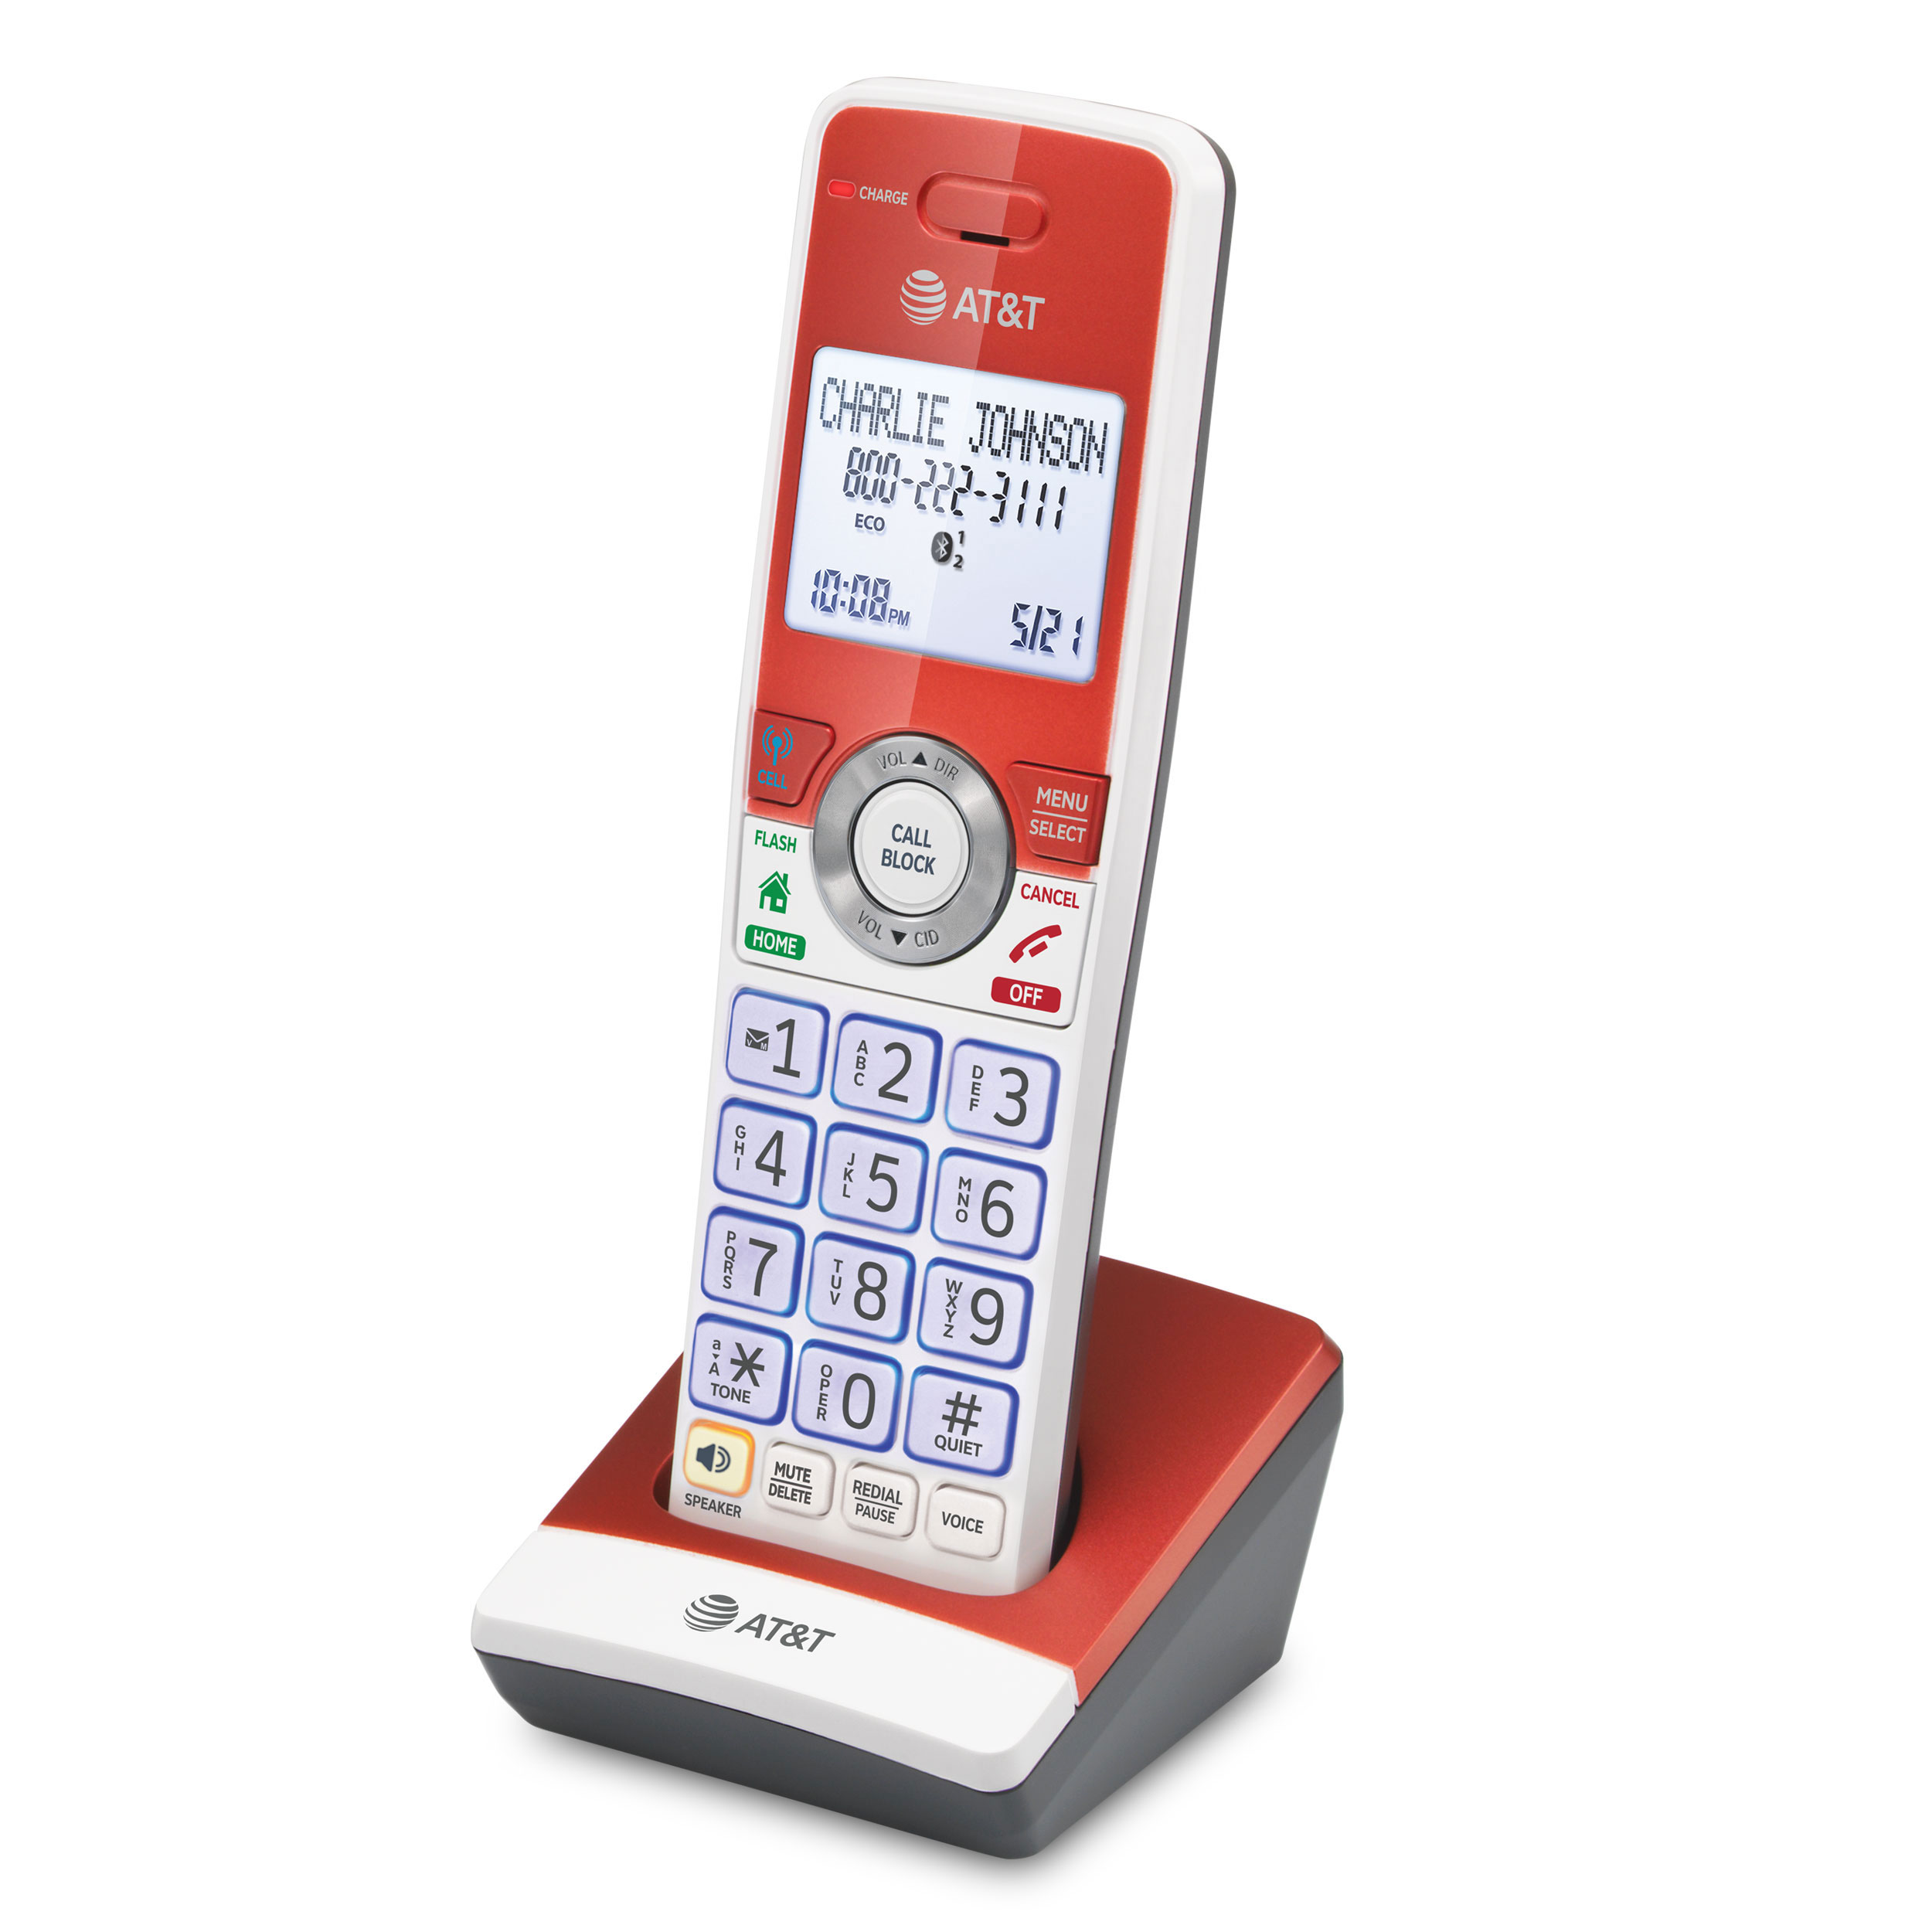 Accessory Handset with Unsurpassed Range, Bluetooth Connect to Cell, and Smart Call Blocker (Red) - view 3